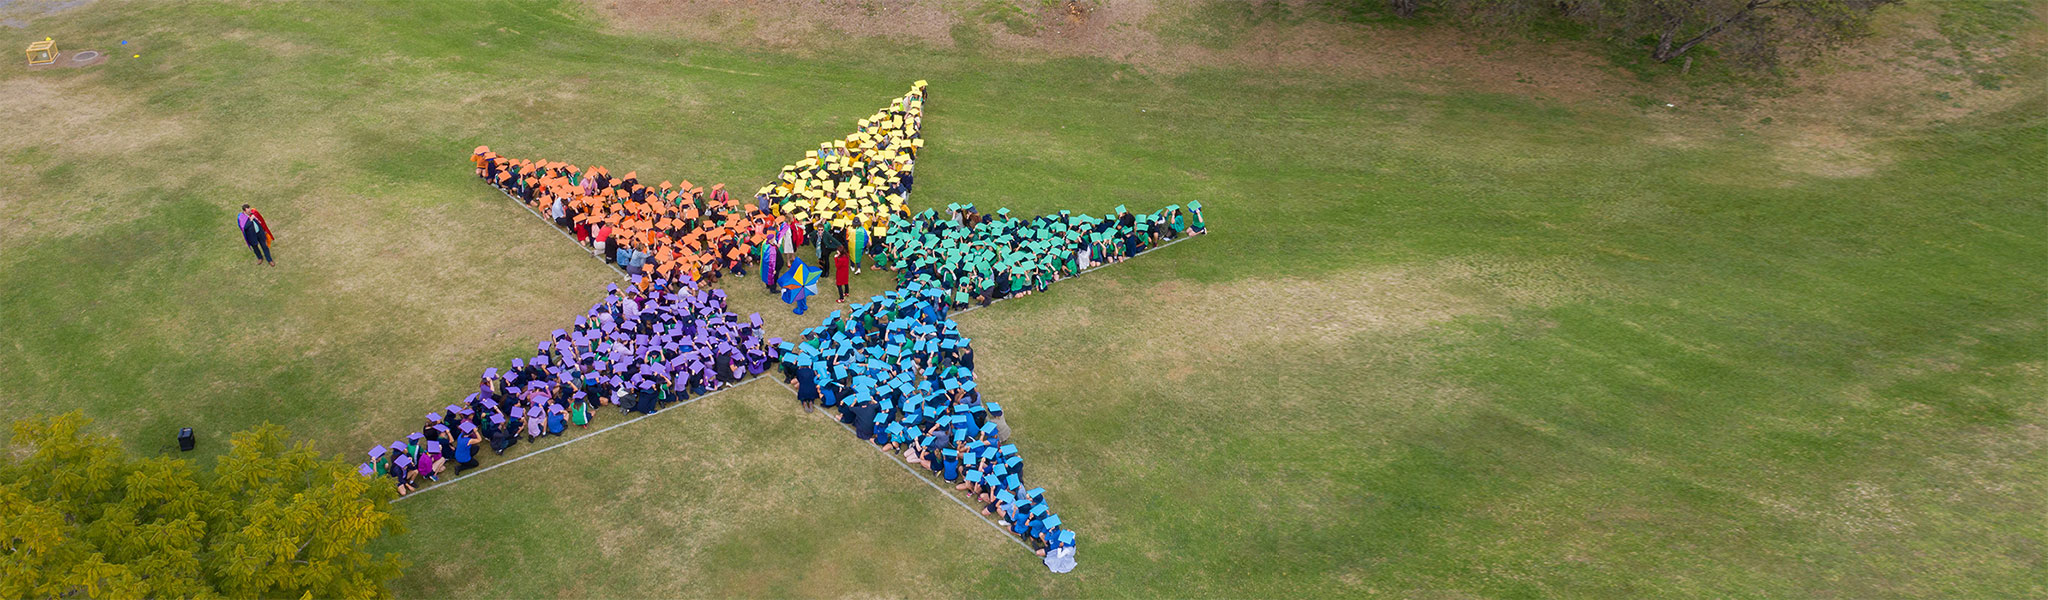 Students and staff form the shape of a star